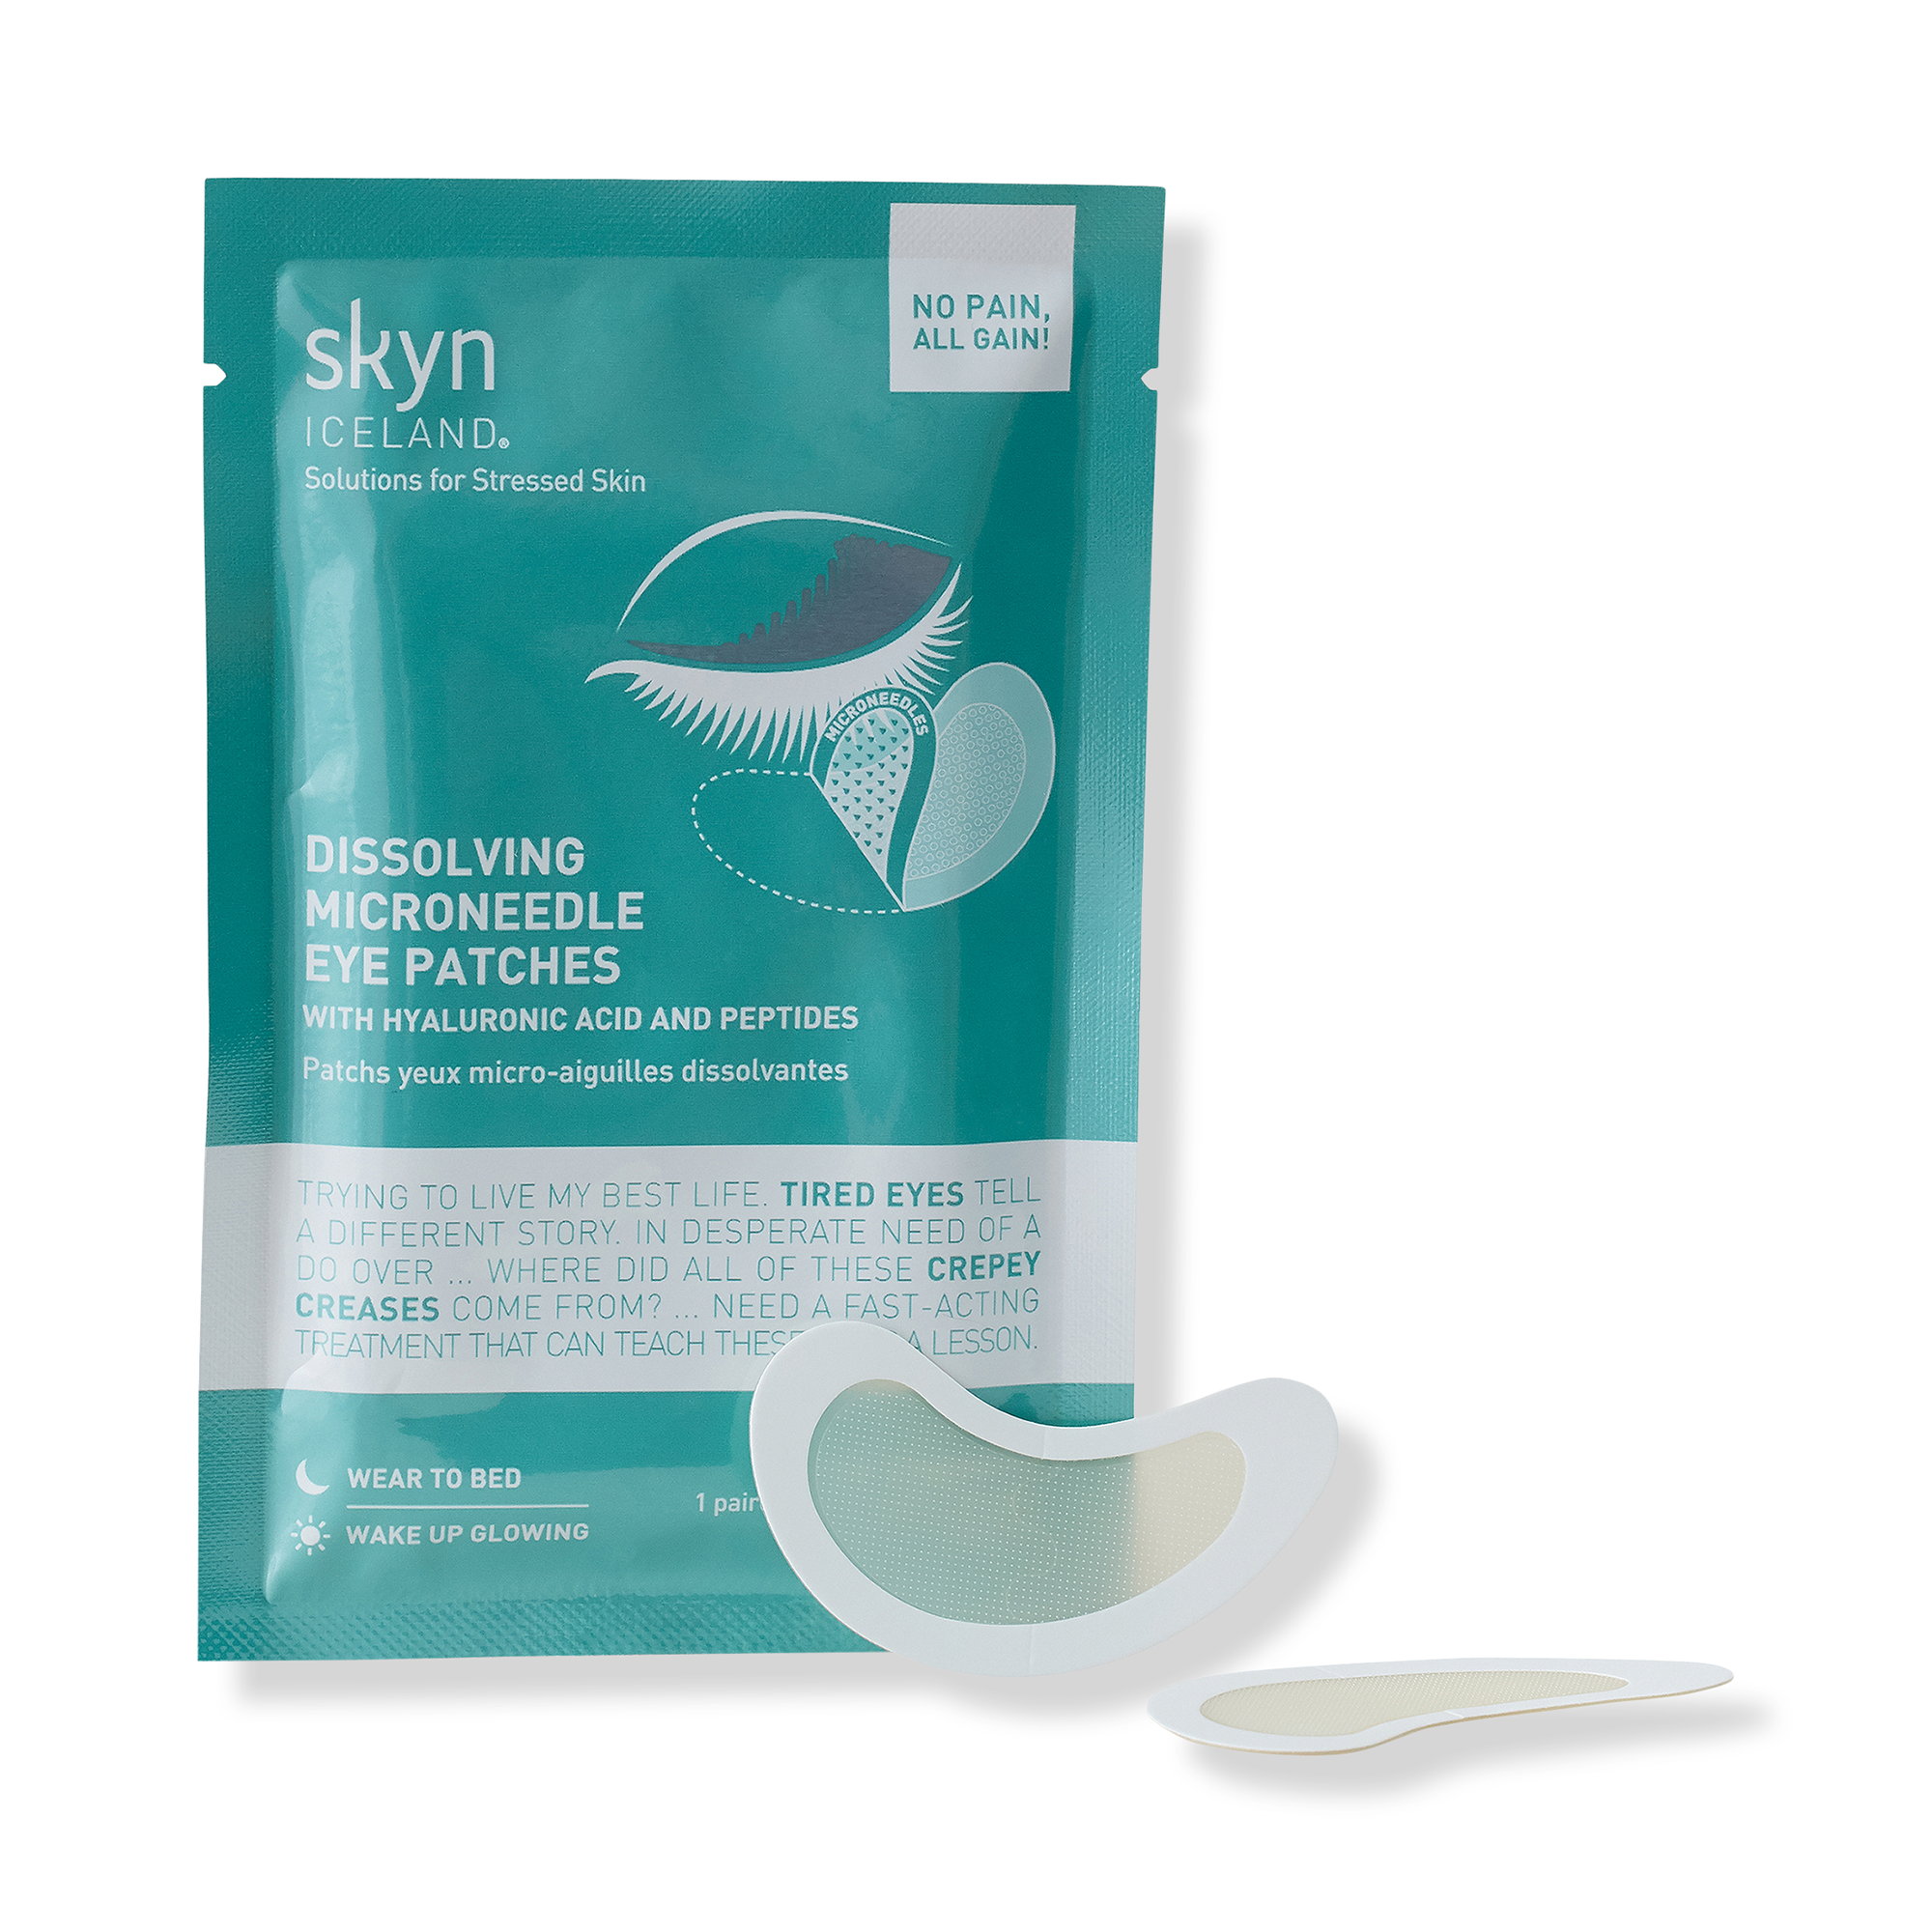 Skyn Iceland Dissolving Microneedle Eye Patches / 1 pair